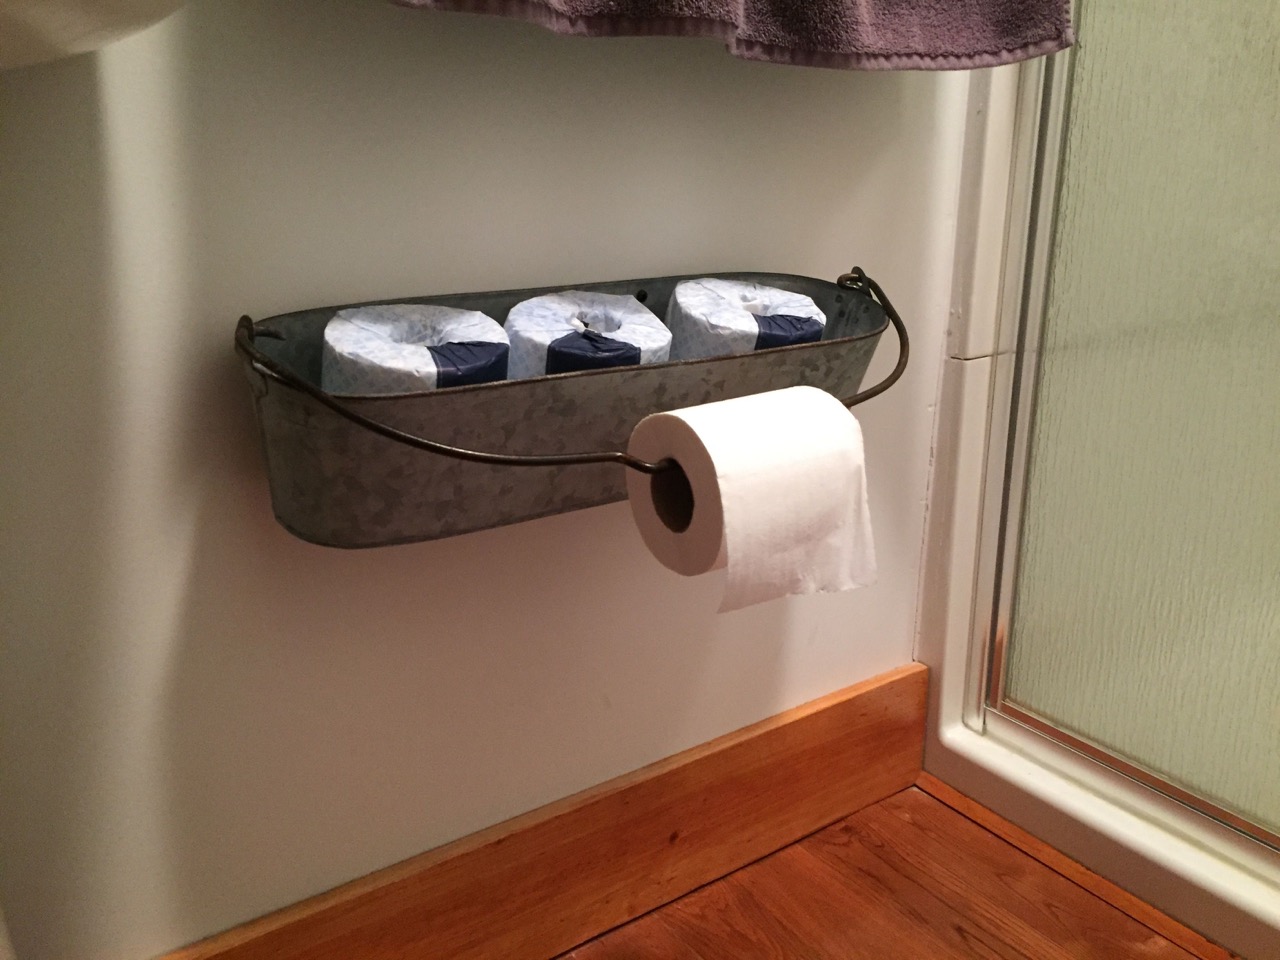 Free-standing Rustic Toilet Paper Holder With Extra Roll 